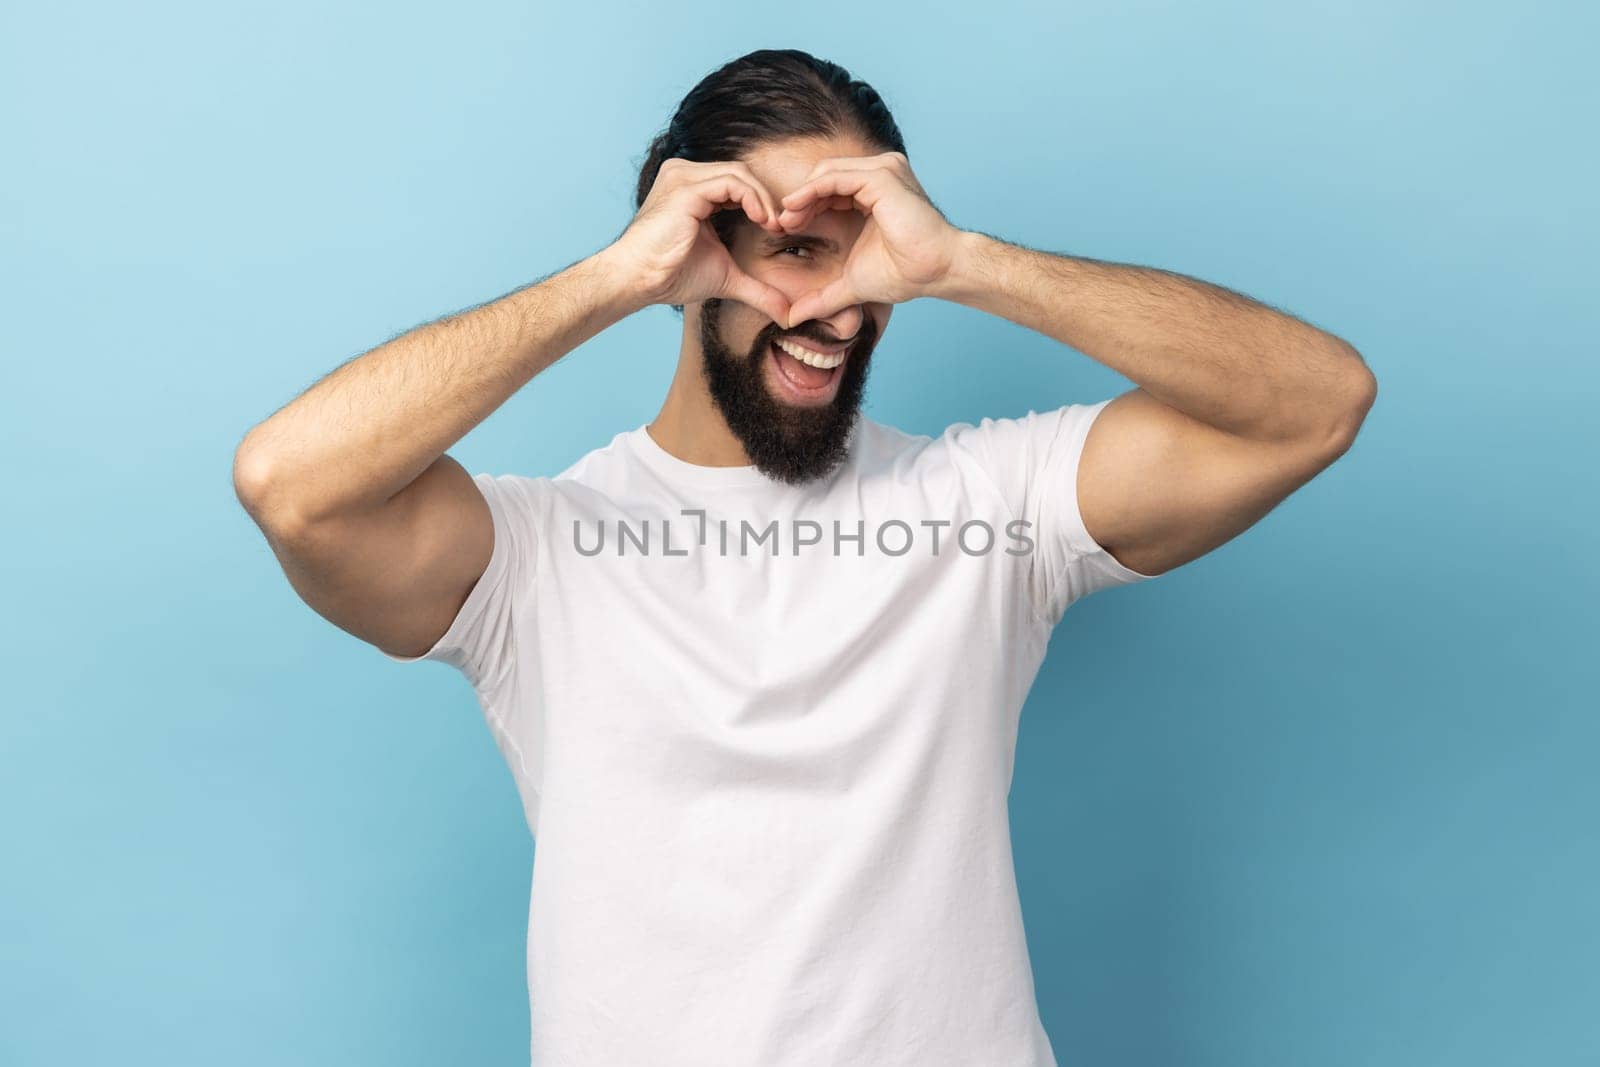 Portrait of happy pleased man with beard wearing white T-shirt making heart gesture over mouth smiles toothily, expressing romantic feelings. Indoor studio shot isolated on blue background.